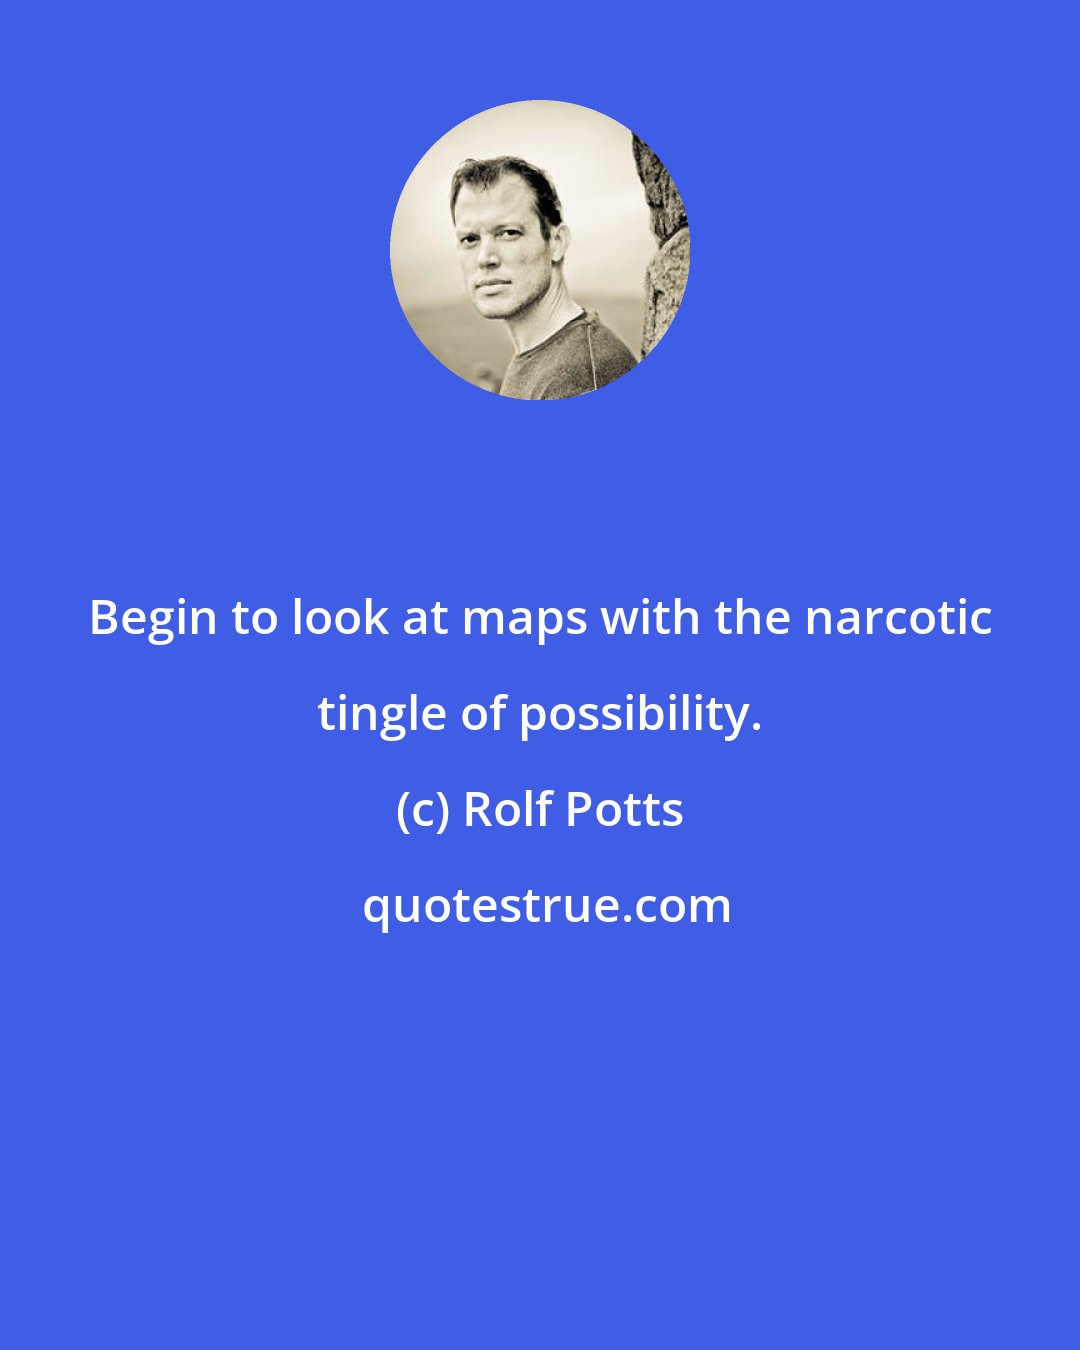 Rolf Potts: Begin to look at maps with the narcotic tingle of possibility.